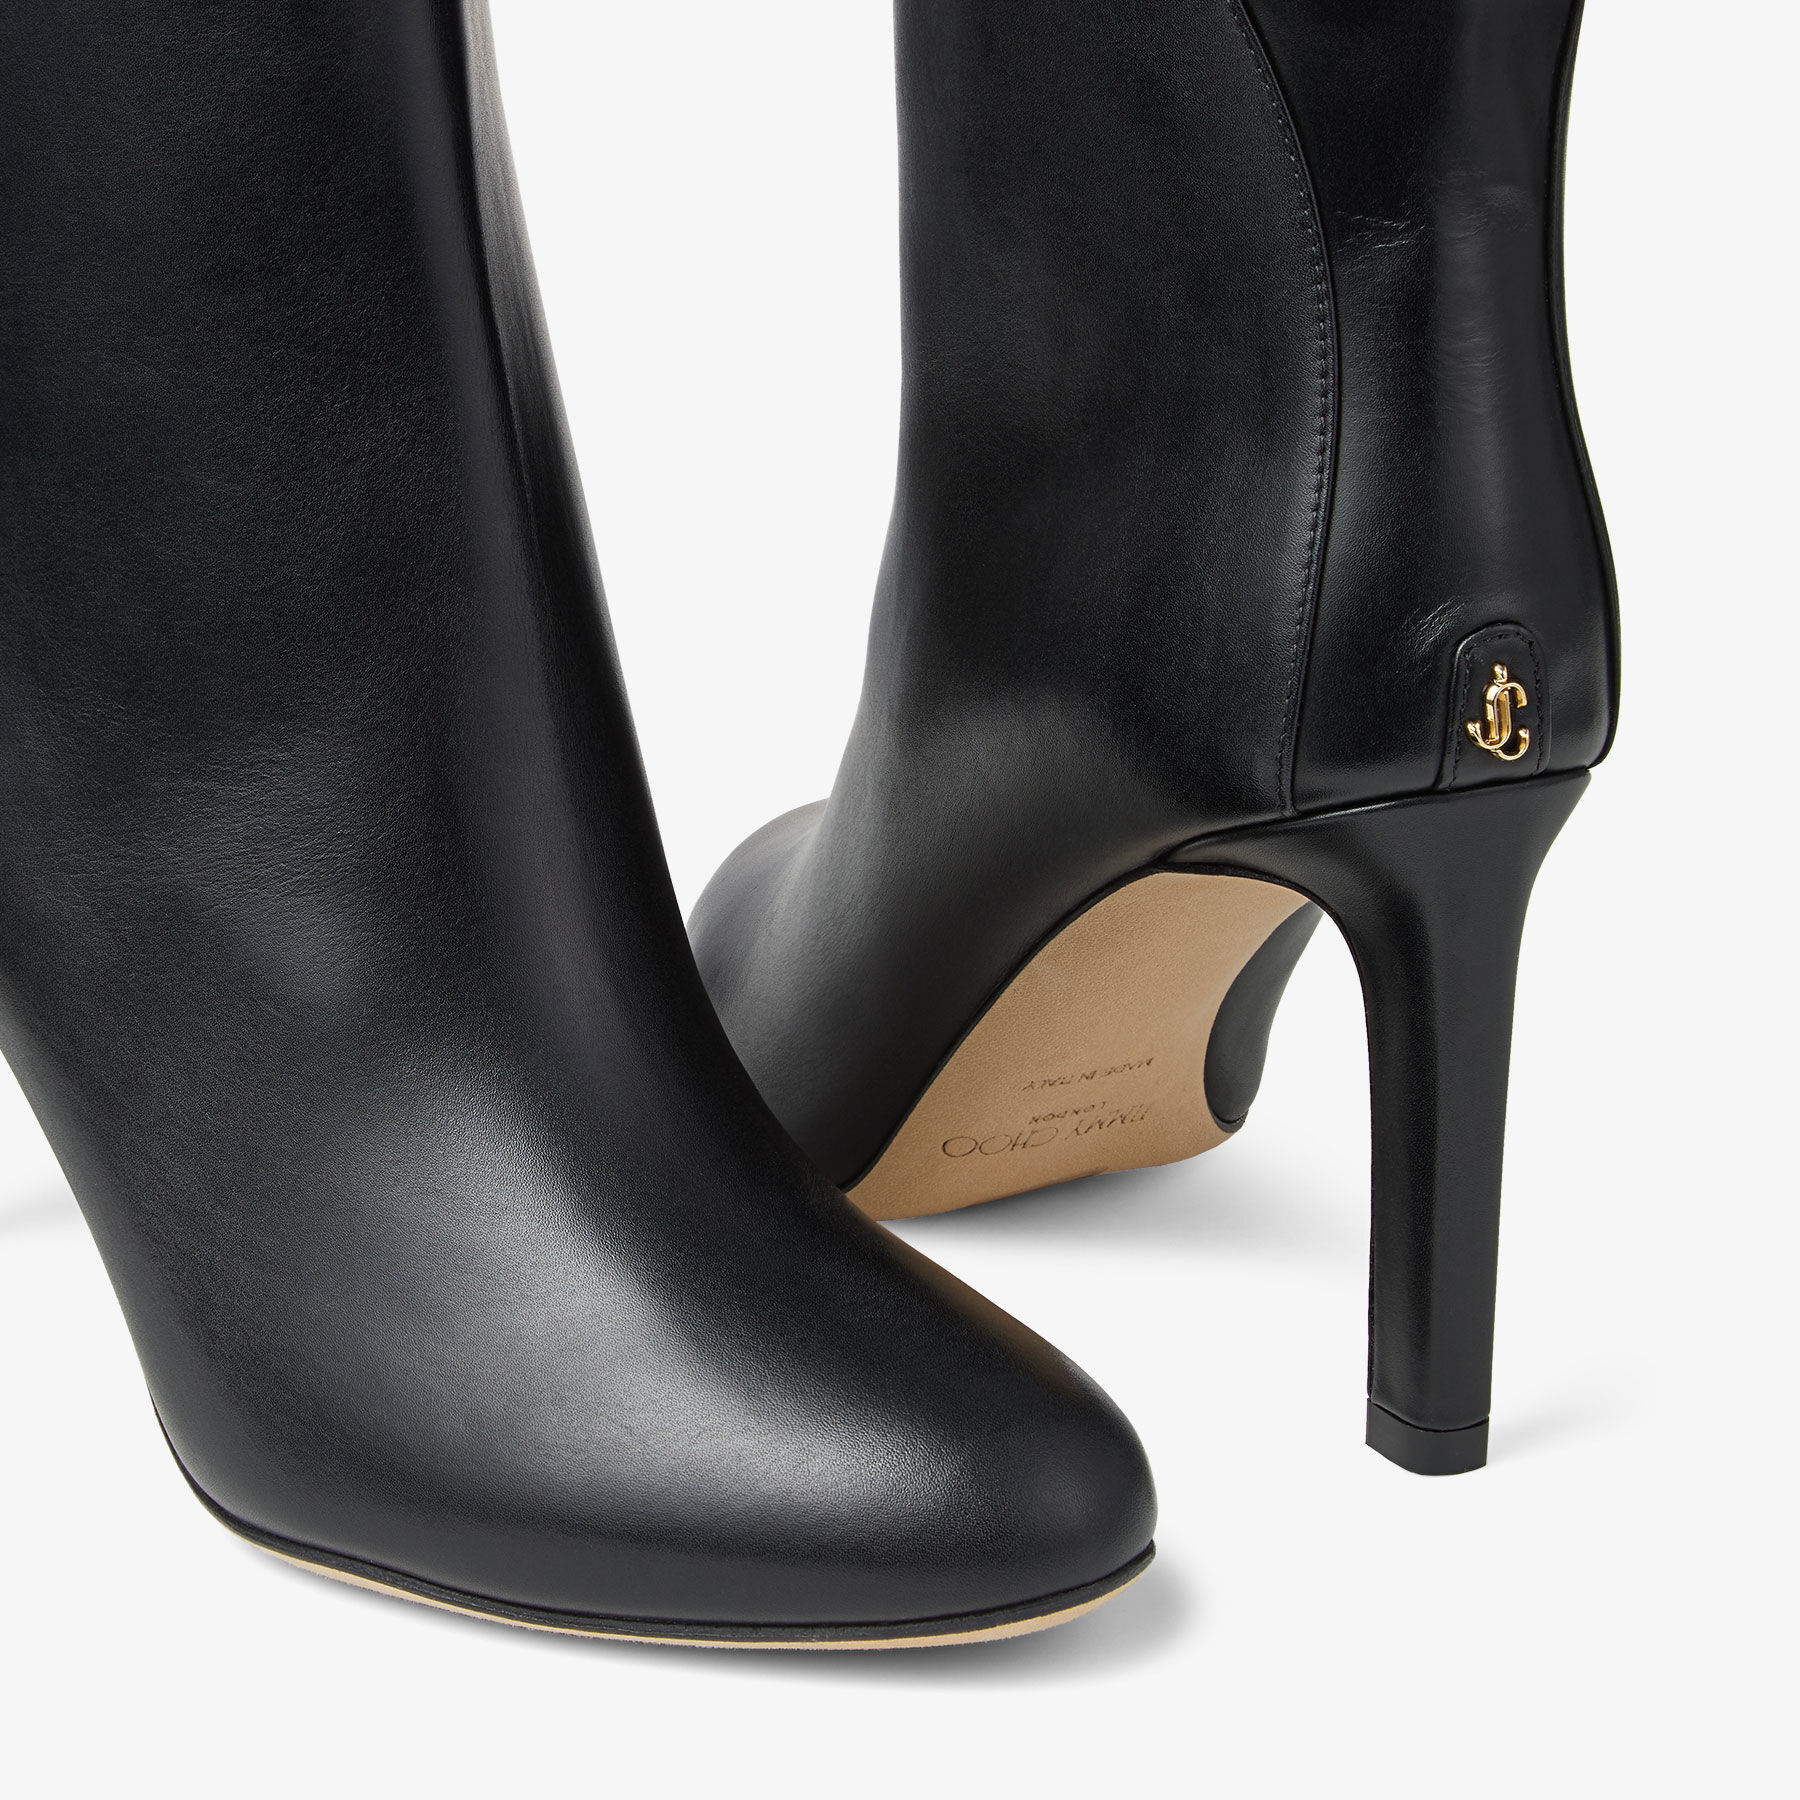 Black Calf Leather Ankle Boots | KARTER AB 85 | Autumn 2022